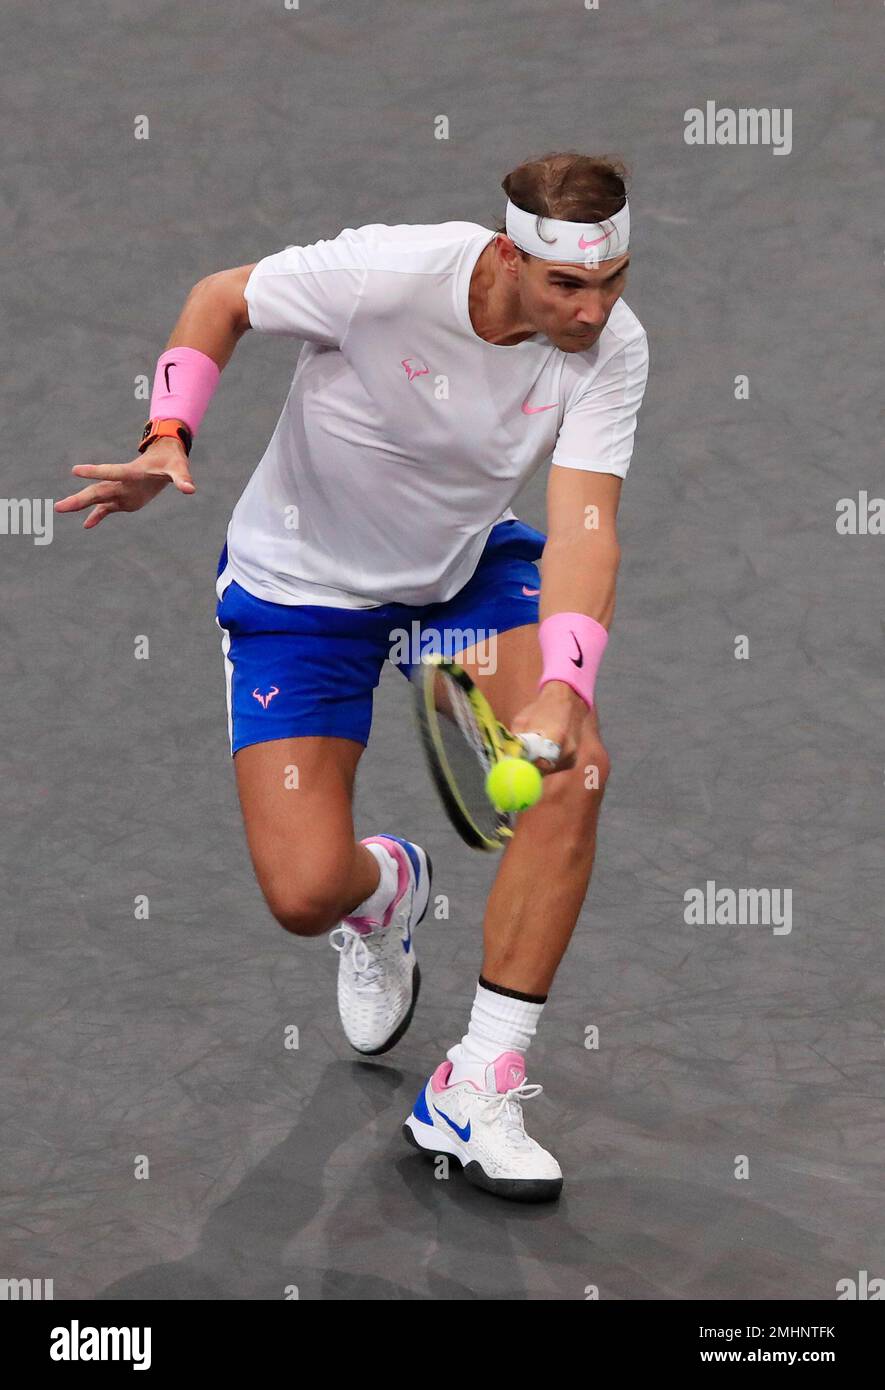 Spains Rafael Nadal returns the ball to Frances Adrian Mannarino during the 2nd round match of the Paris Masters tennis tournament in Paris, France, Wednesday, Oct